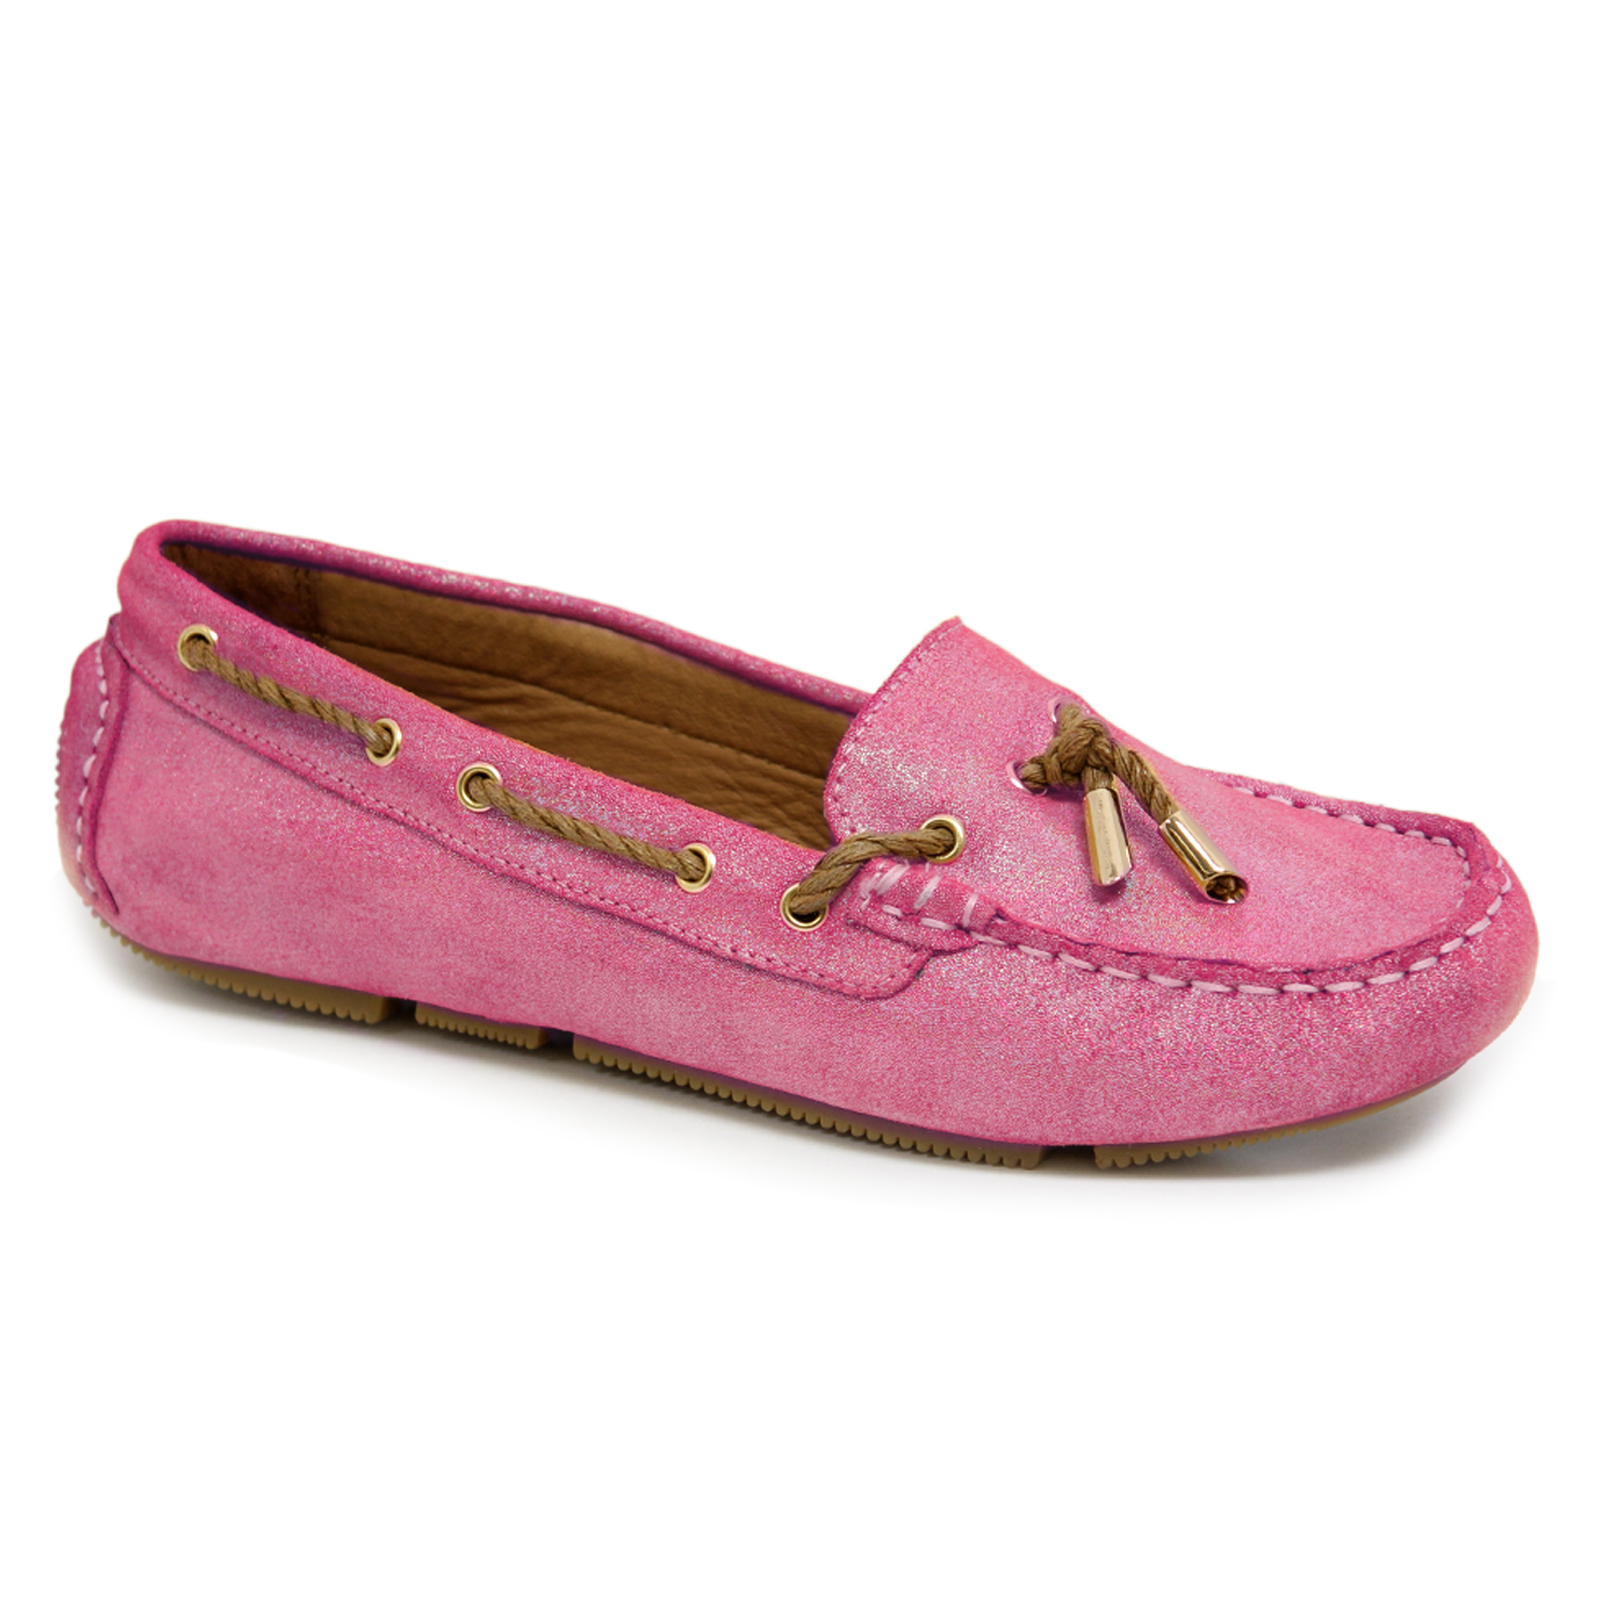 Women's 100% leather Comfort-Arch insole Pink Elite Moc